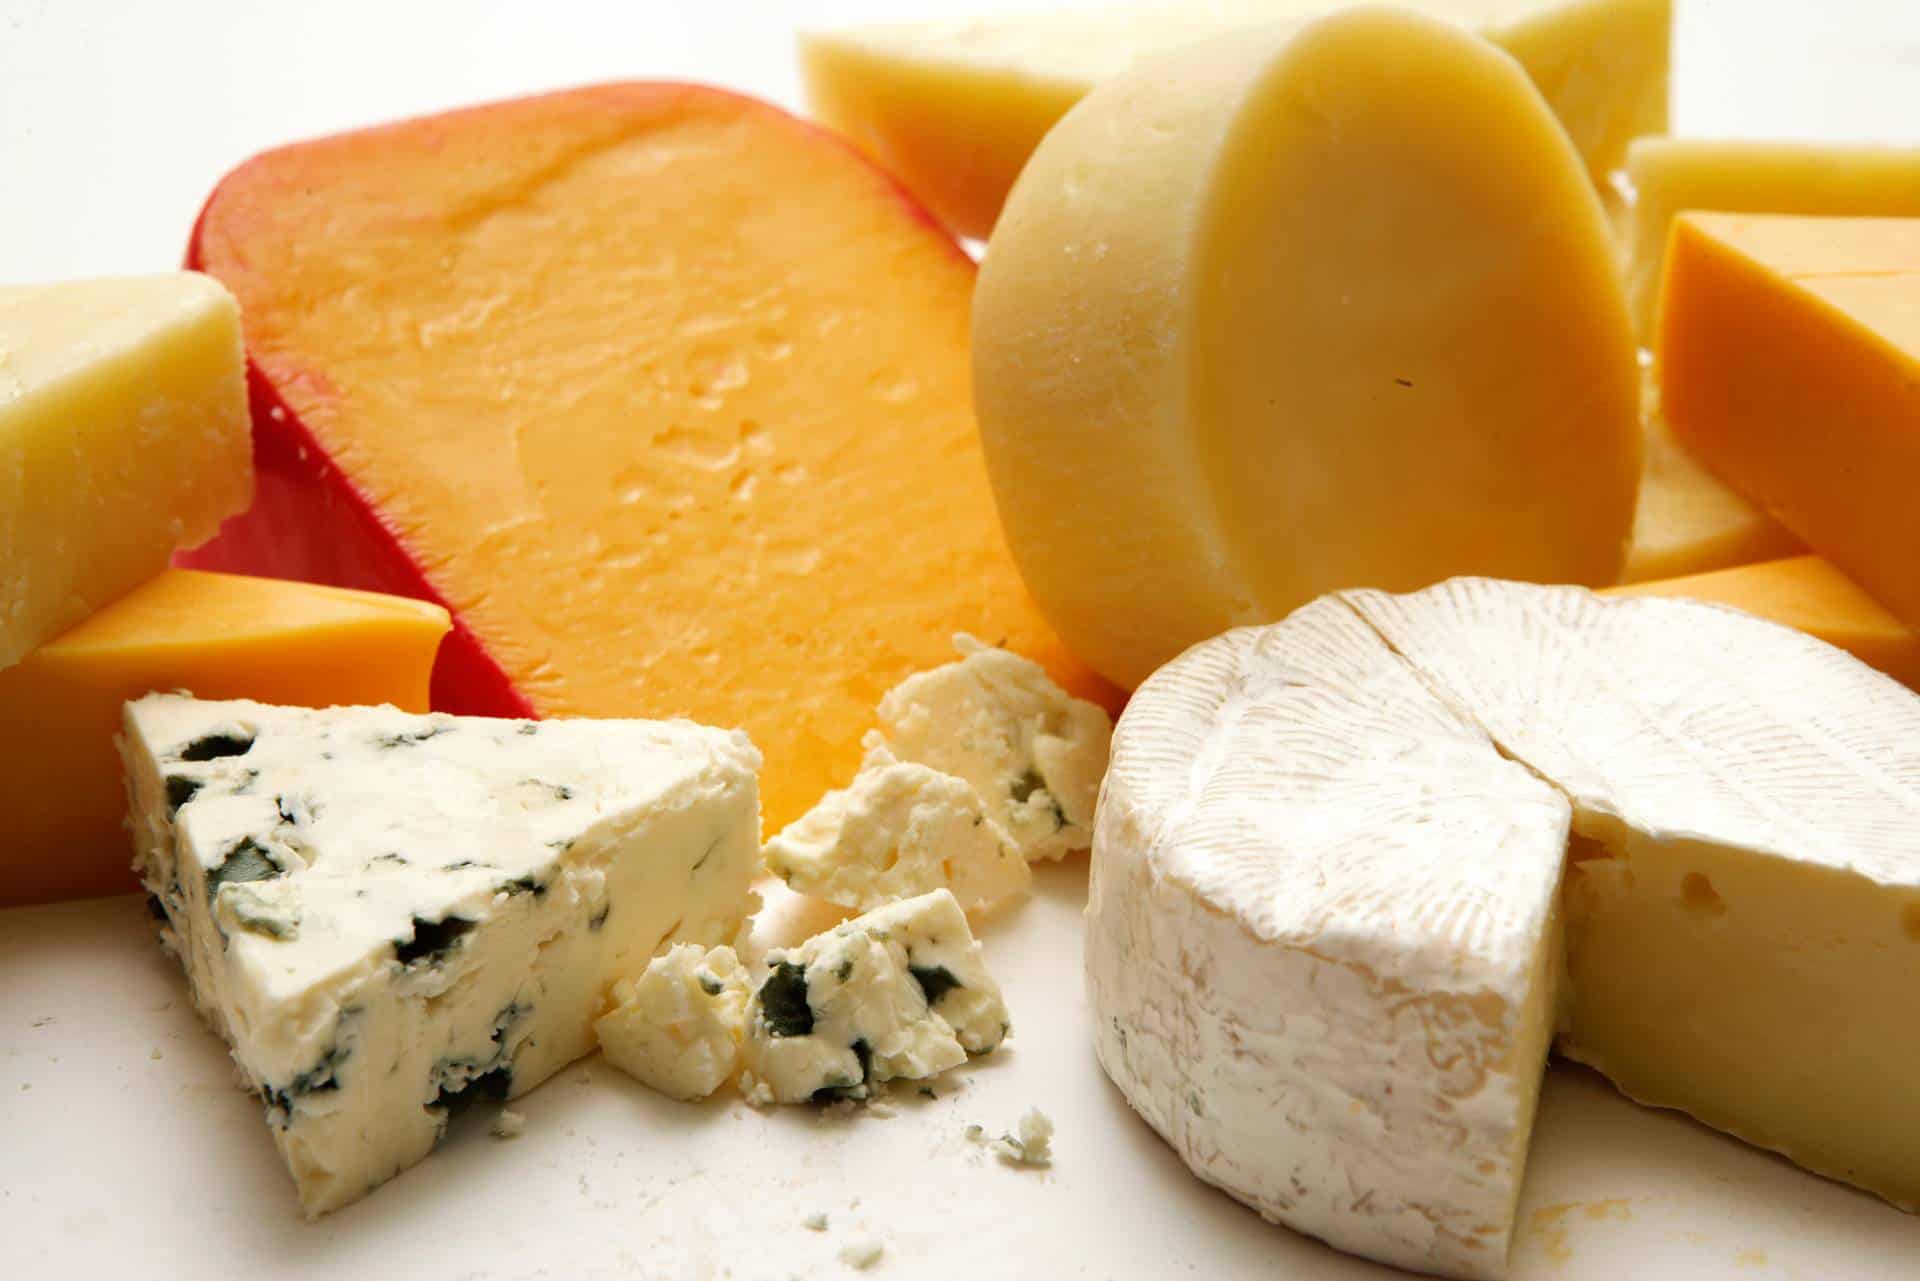 How many types of cheese are there?